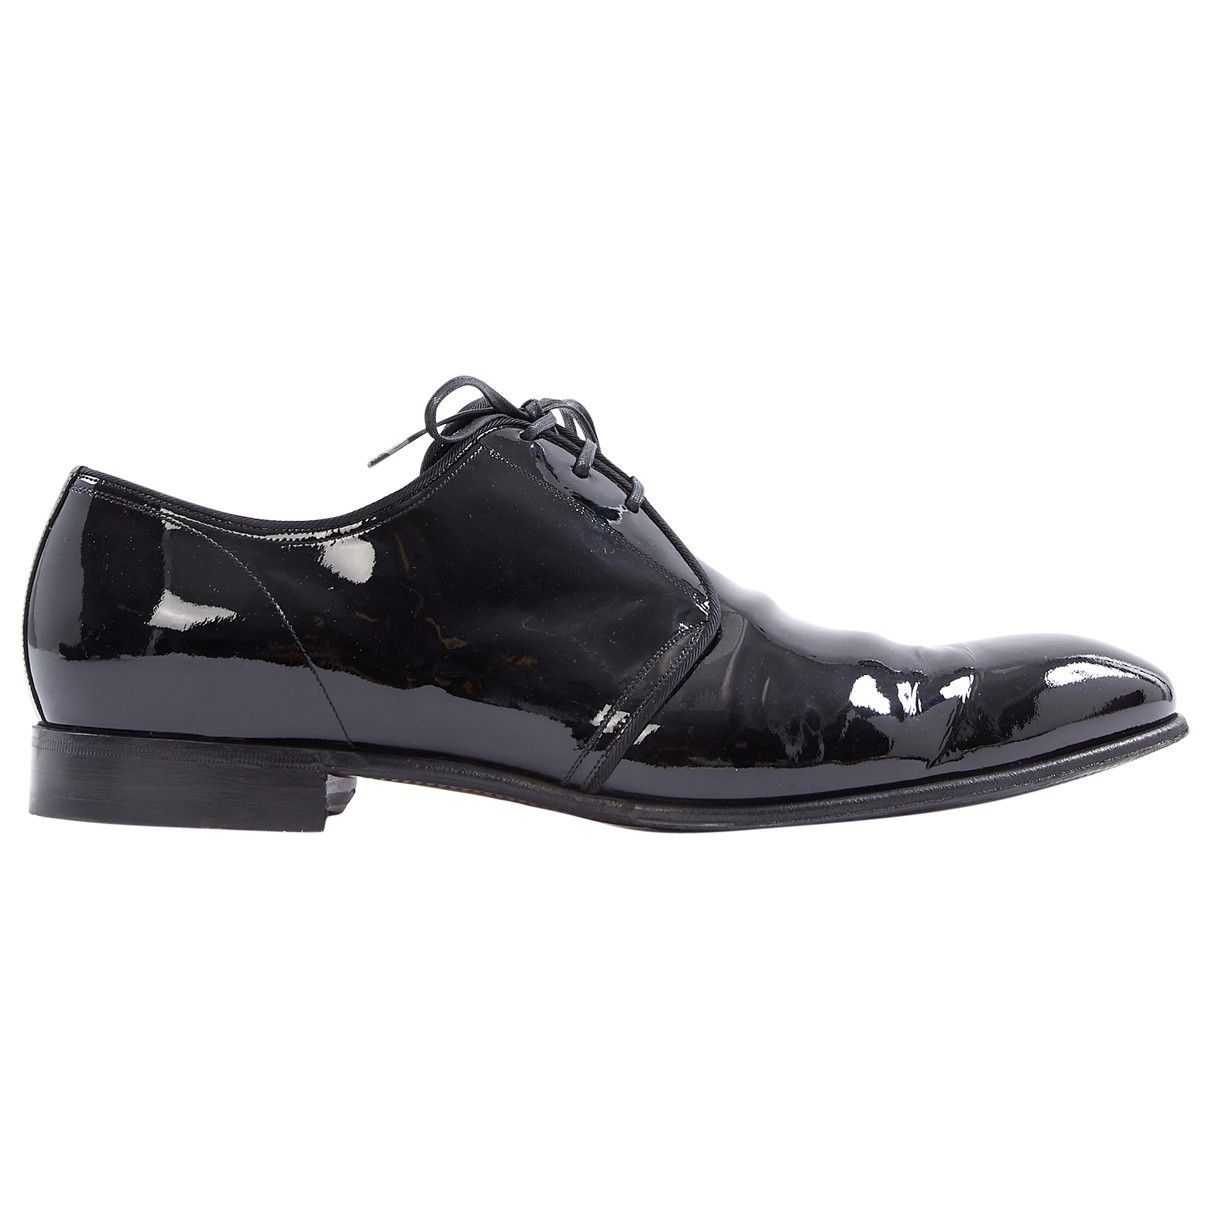 Patent leather lace ups Dolce & Gabbana Black size 10.5 UK in Patent ...